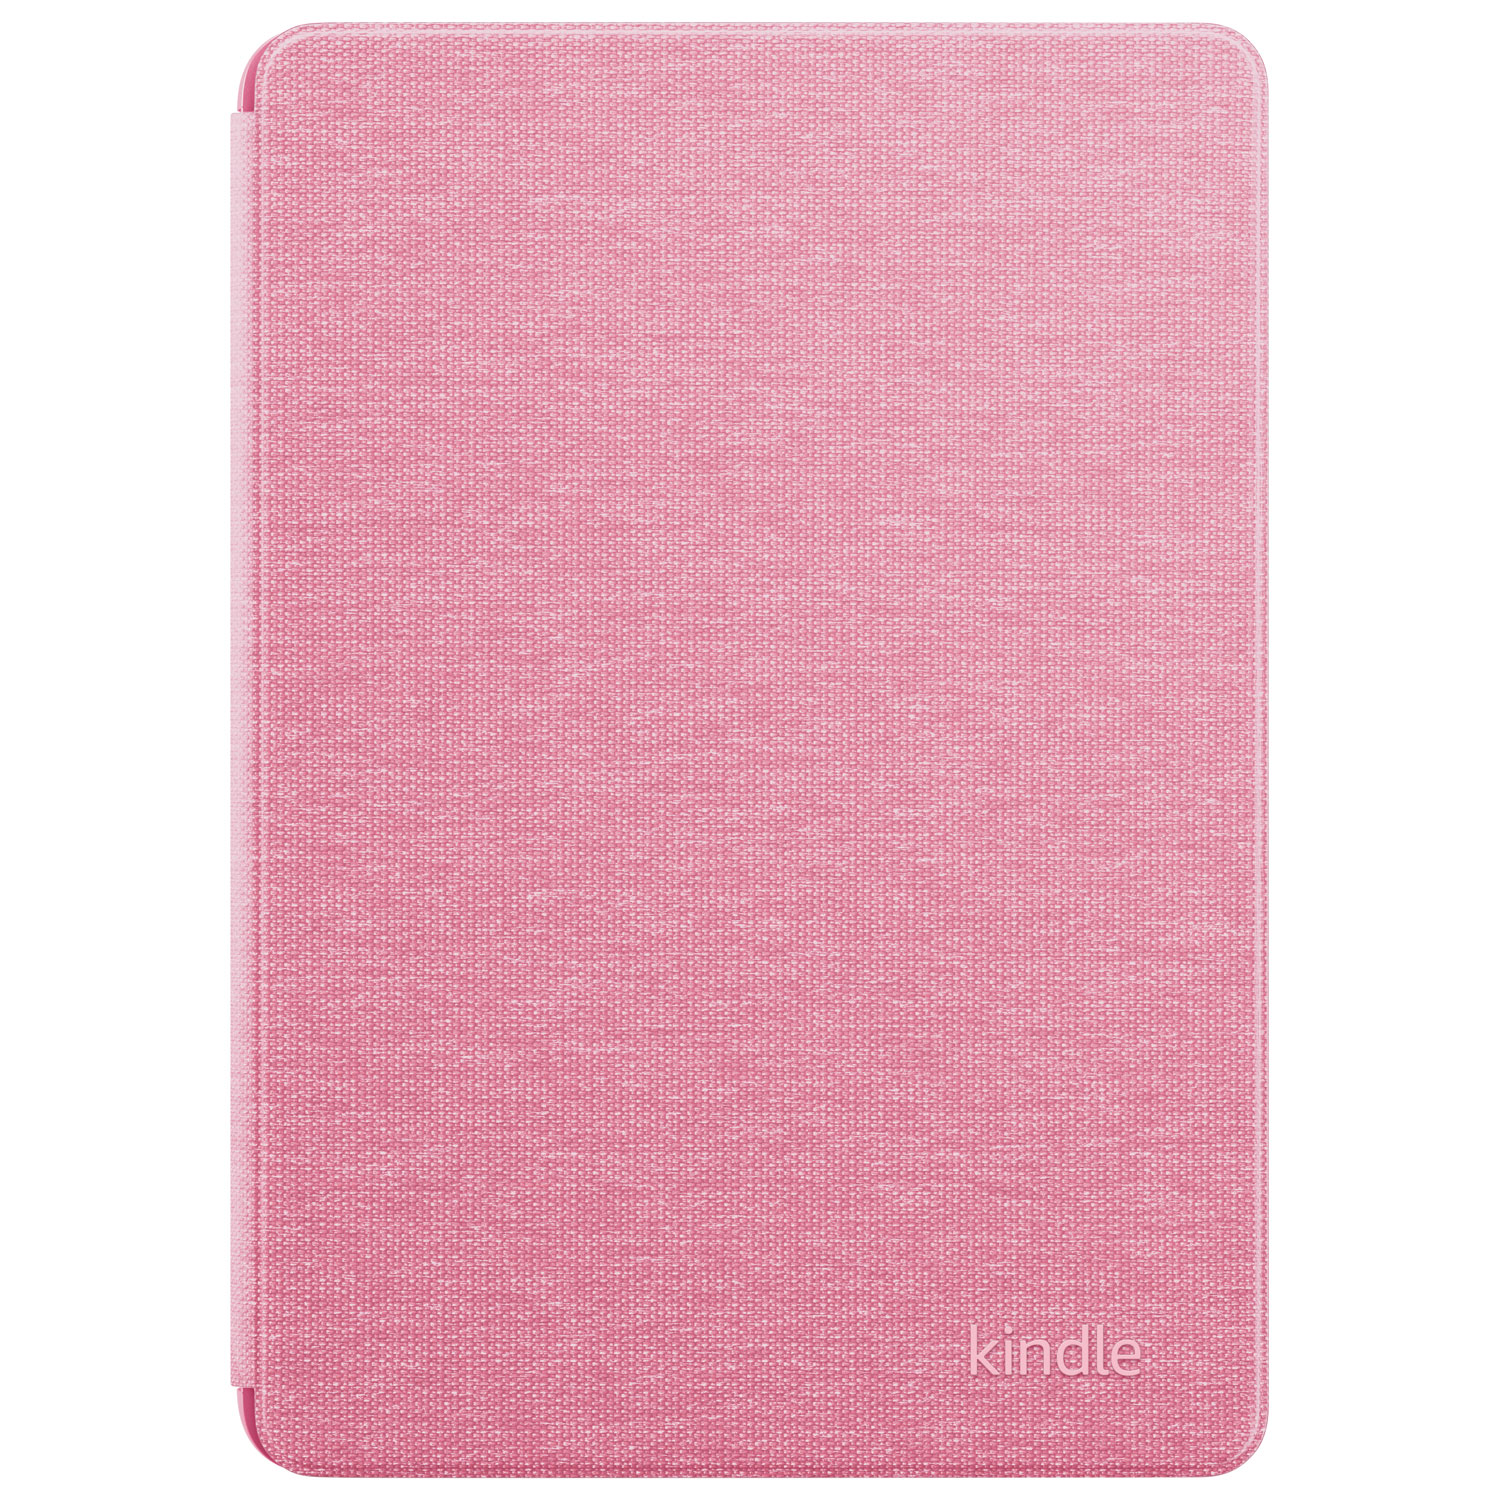 Amazon Kindle (11th Generation) Fabric Cover - Rose